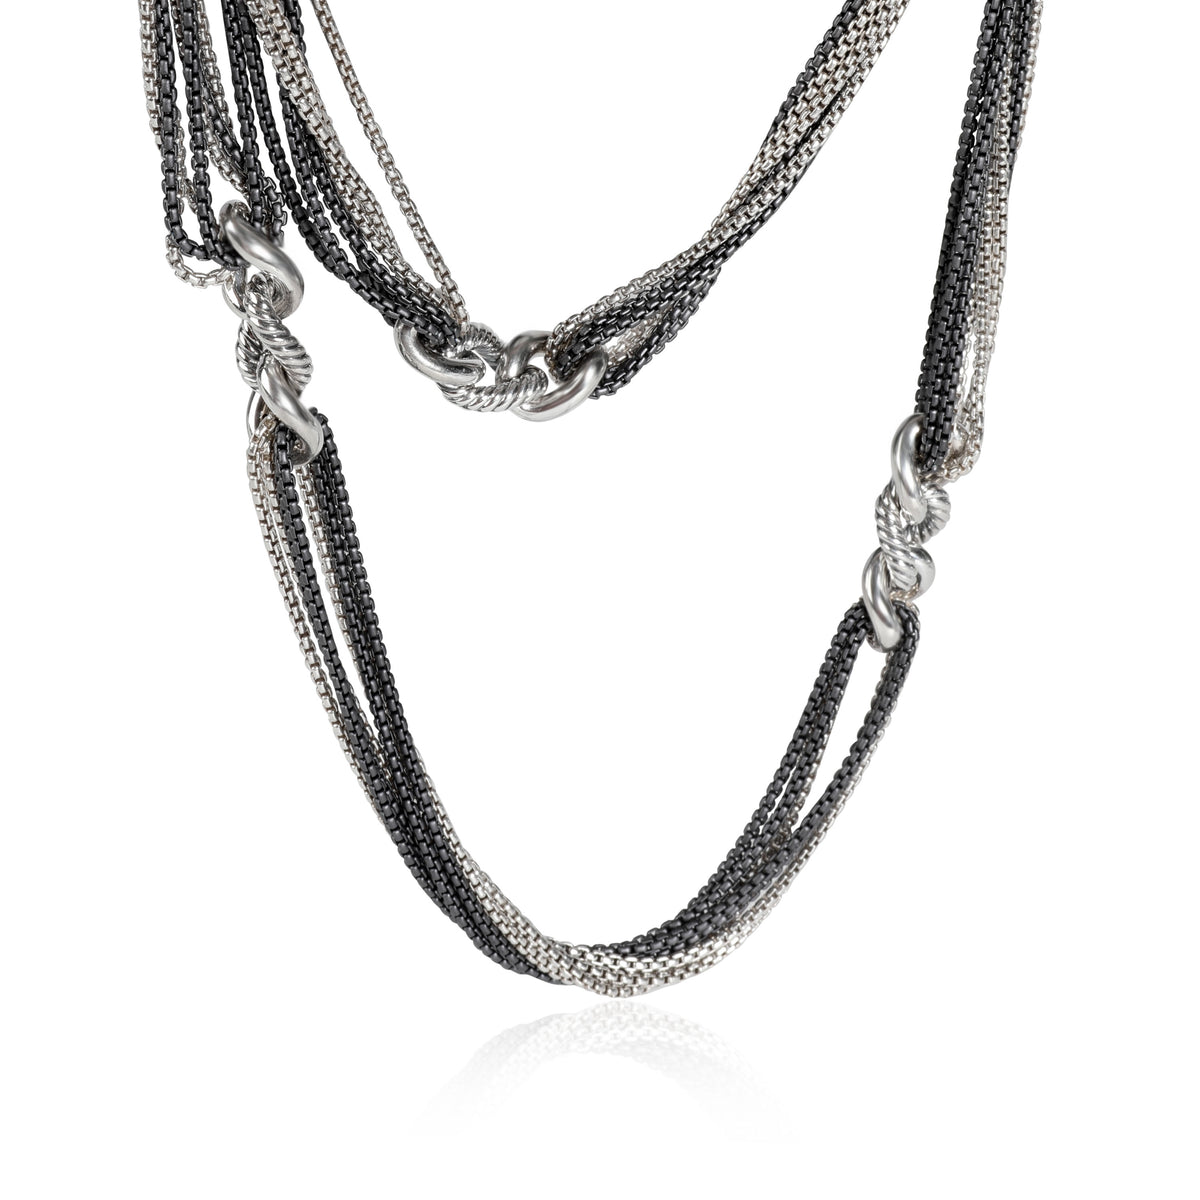 David Yurman Multi-Strand Cable Curb Link Necklace in Blackened Sterling Silver